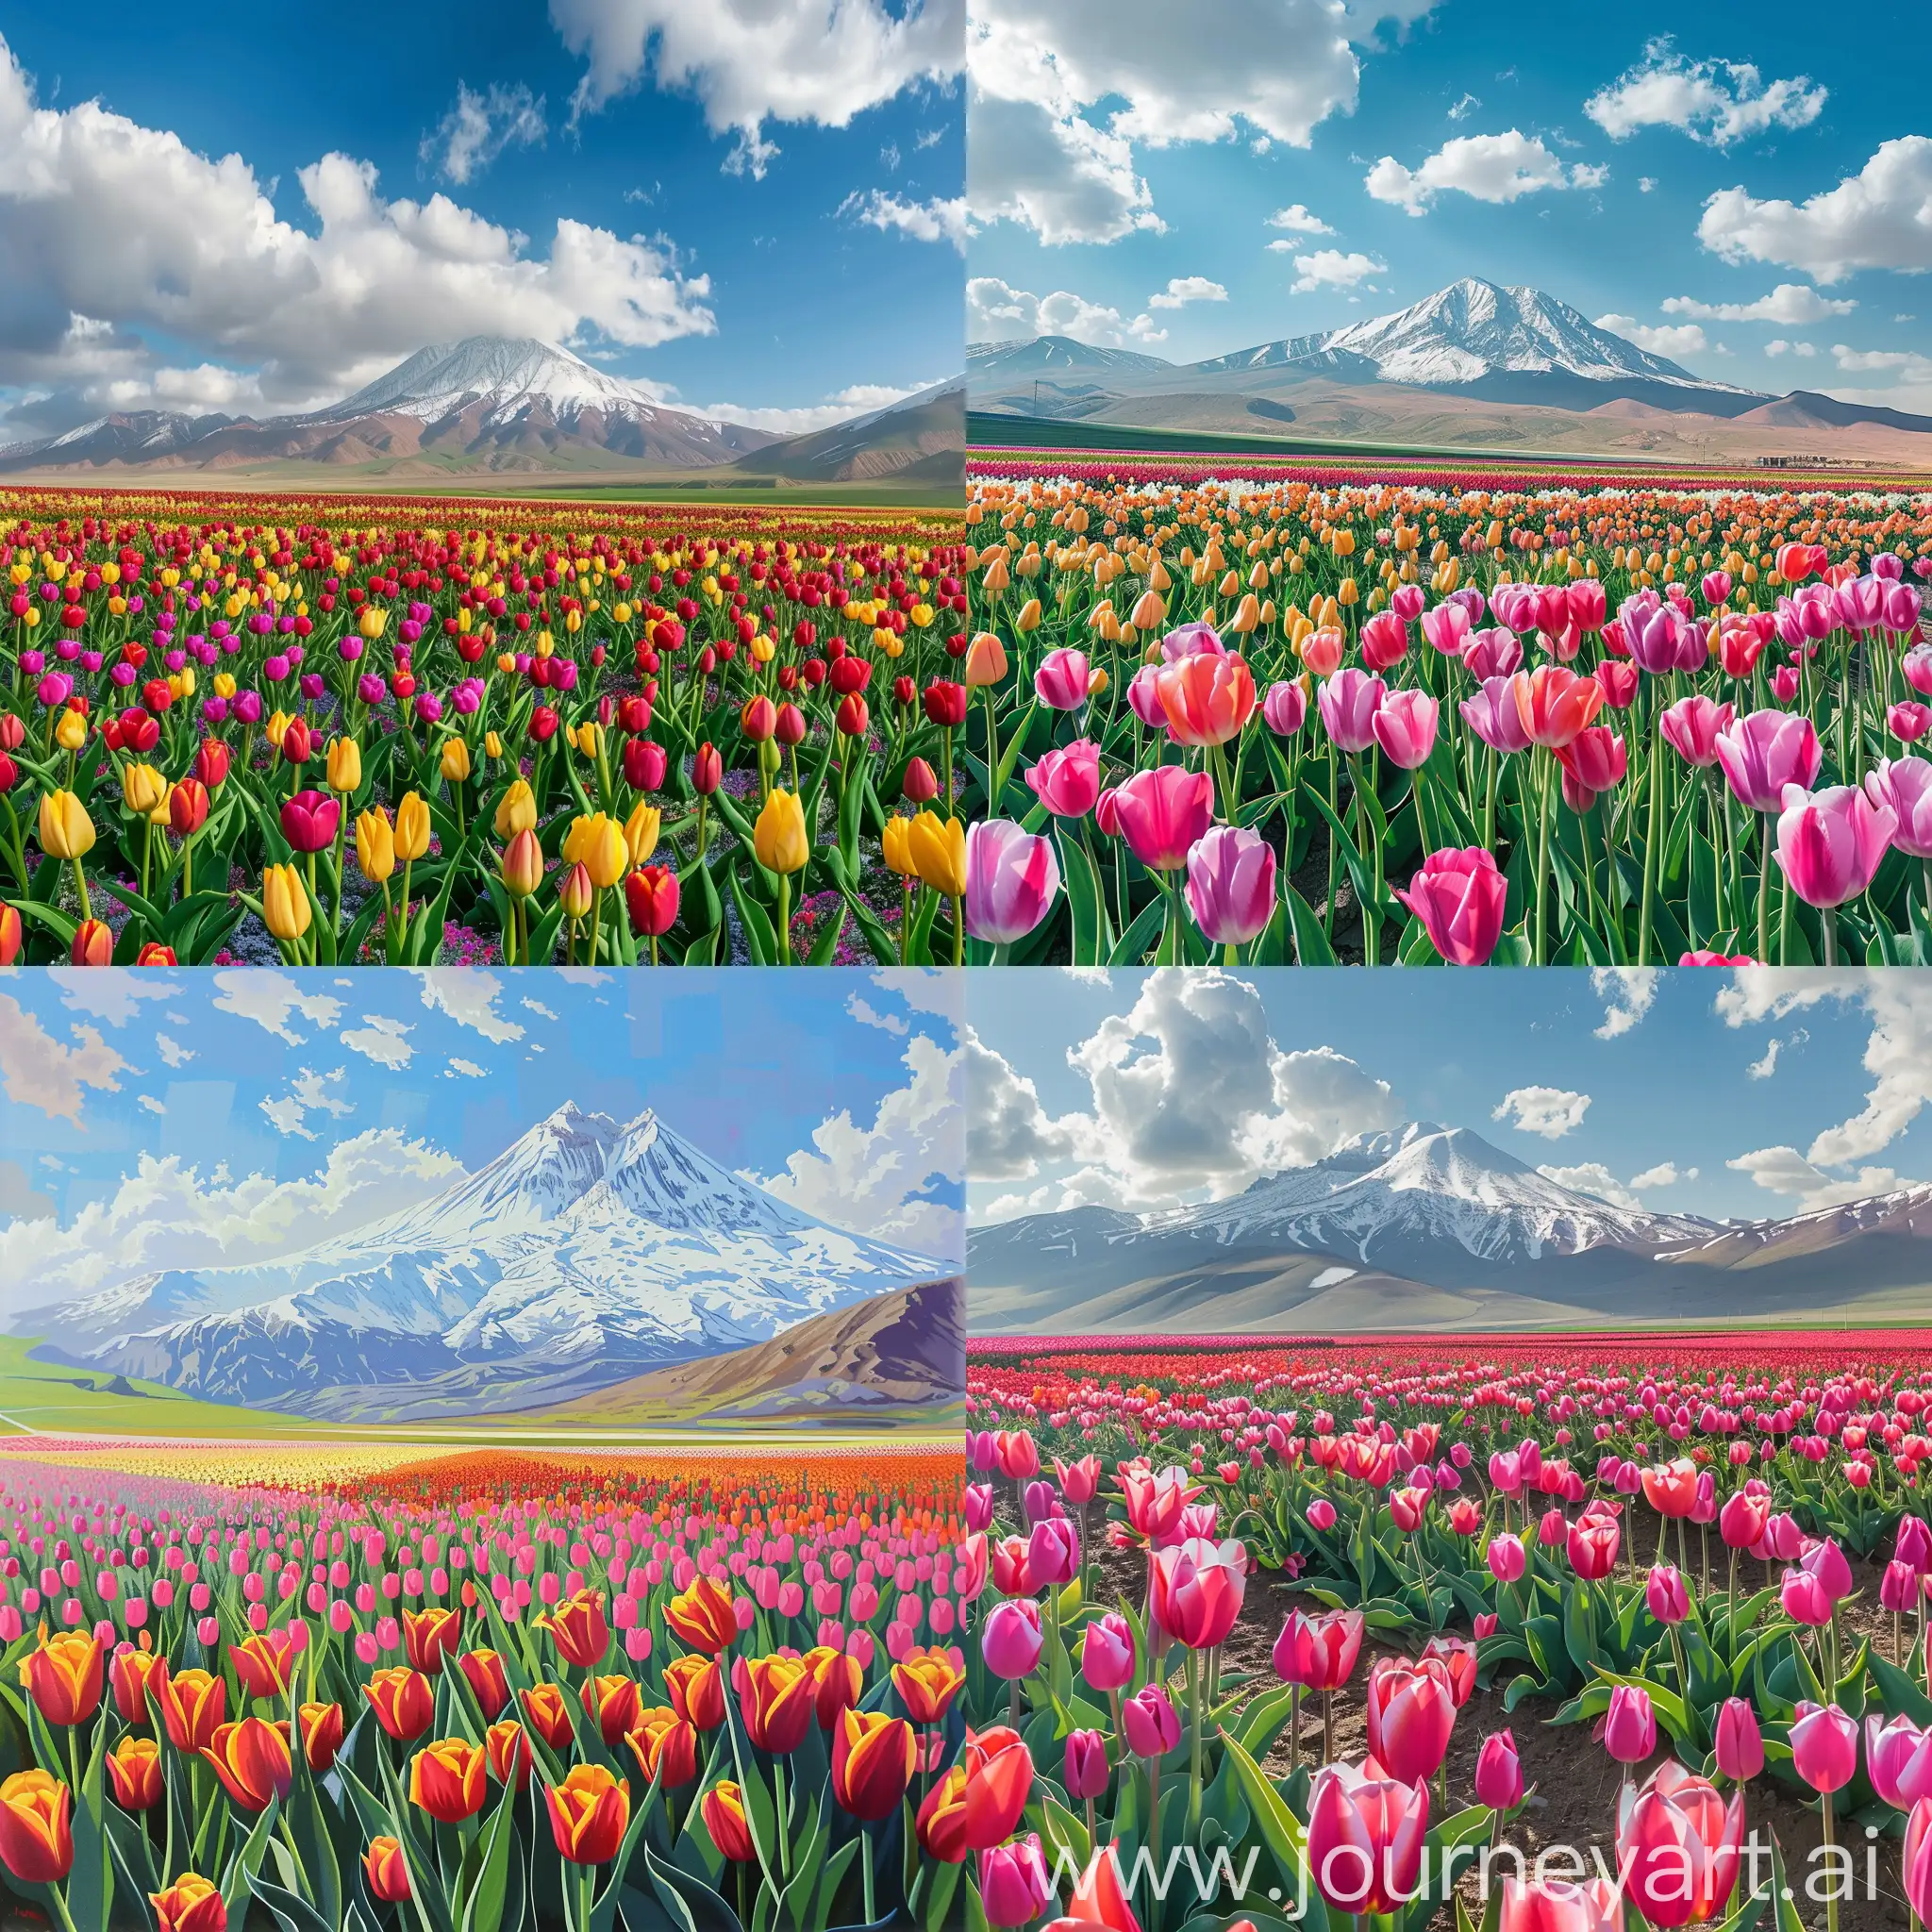 The entire plain is covered with tulips and in the distance is the Damavand peak, which is covered with snow and the weather is sunny and springy, illustration